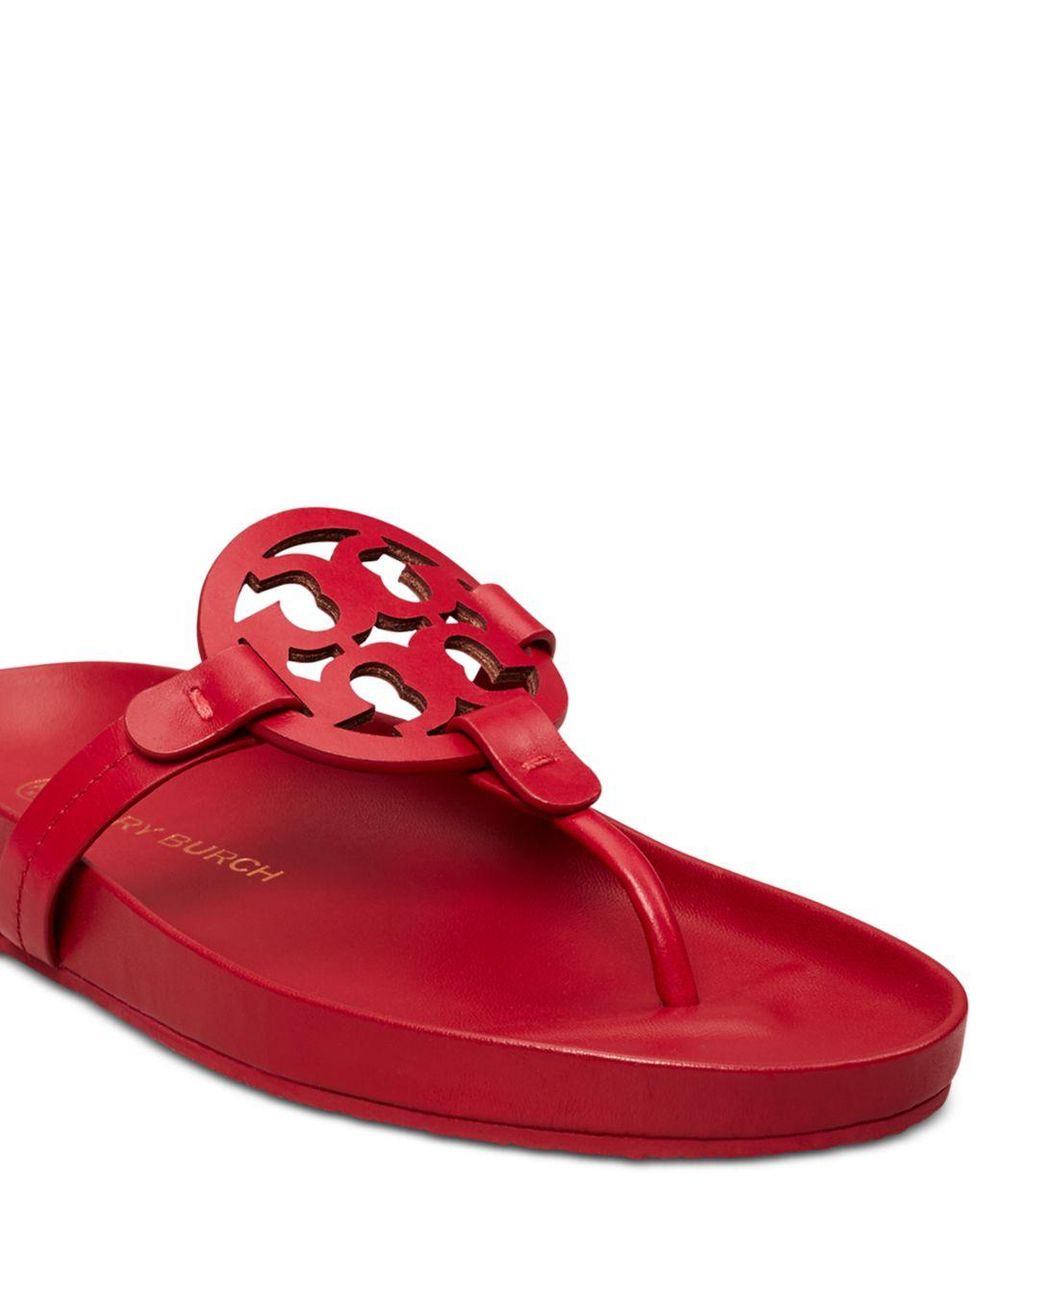 Tory Burch Miller Cloud Thong Sandals in Red | Lyst